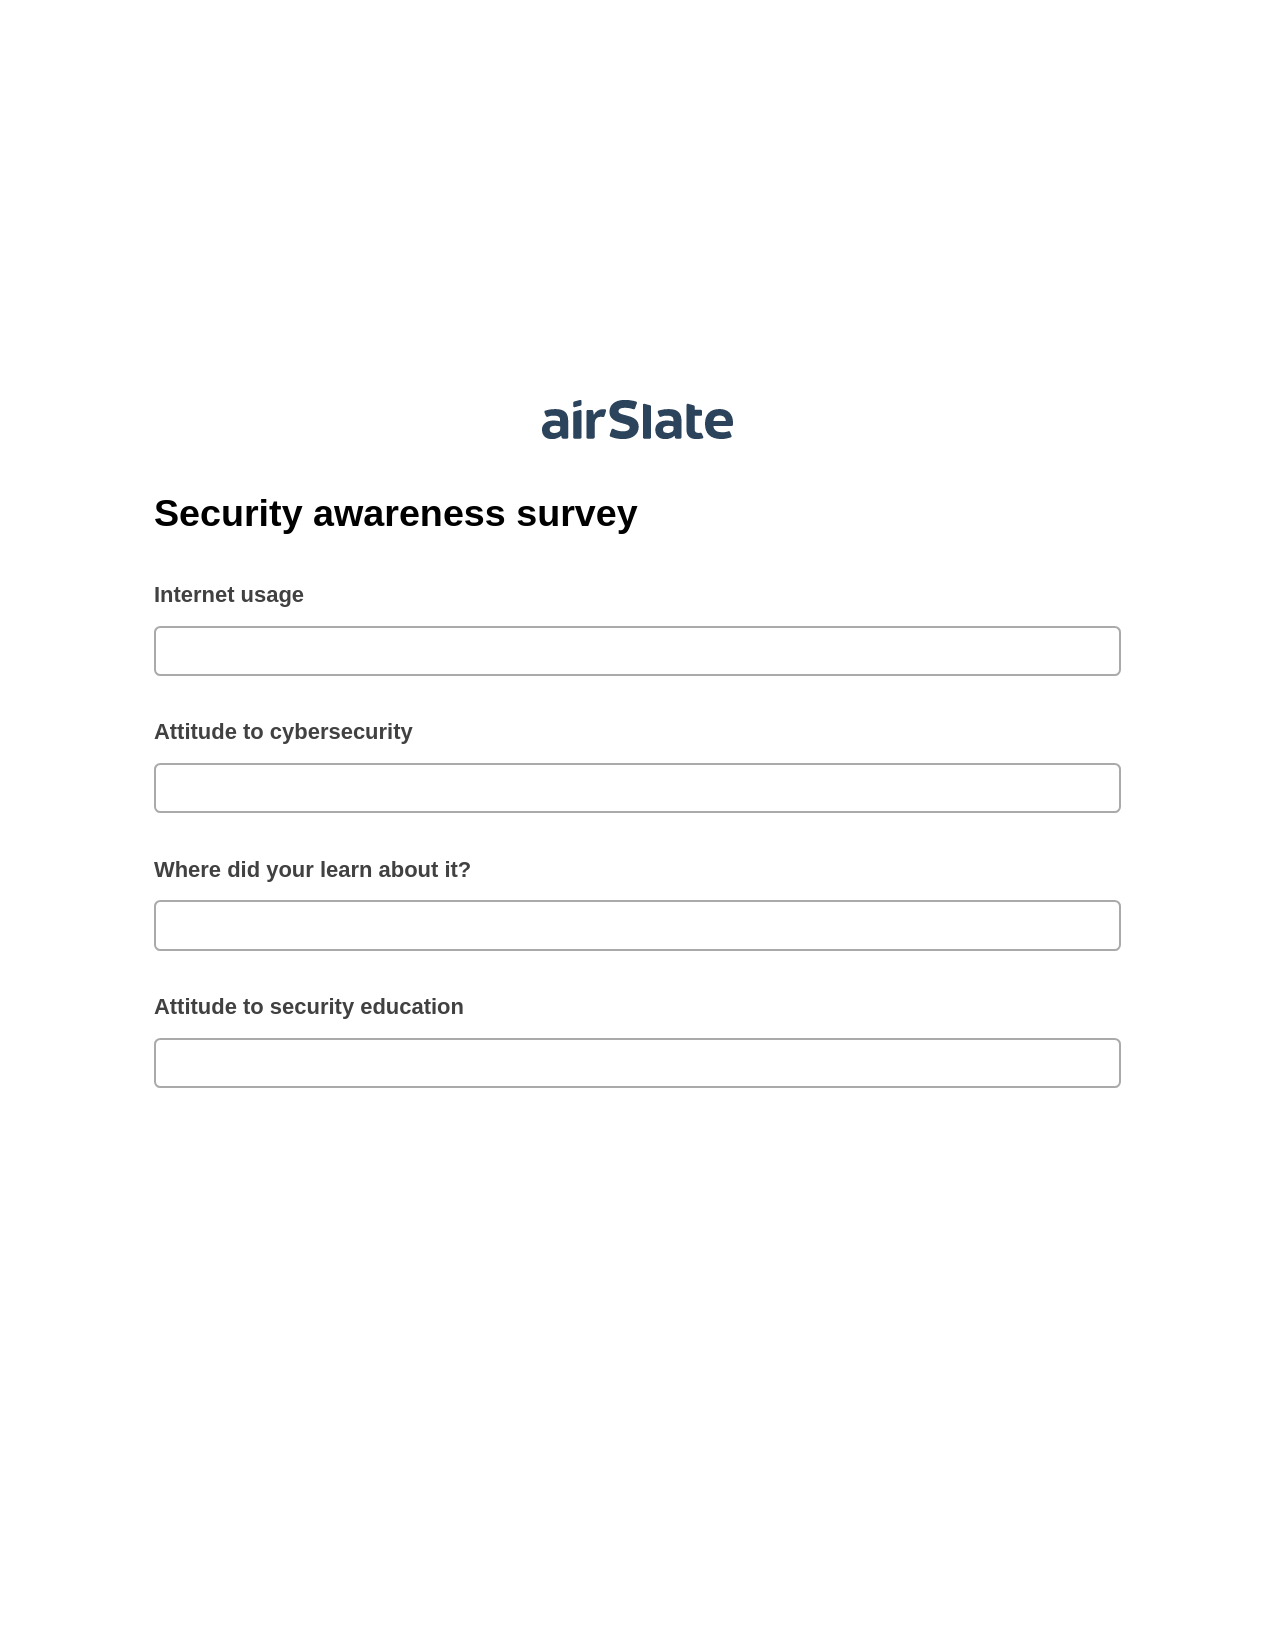 Security awareness survey Pre-fill from NetSuite Records Bot, Lock the slate bot, Dropbox Bot